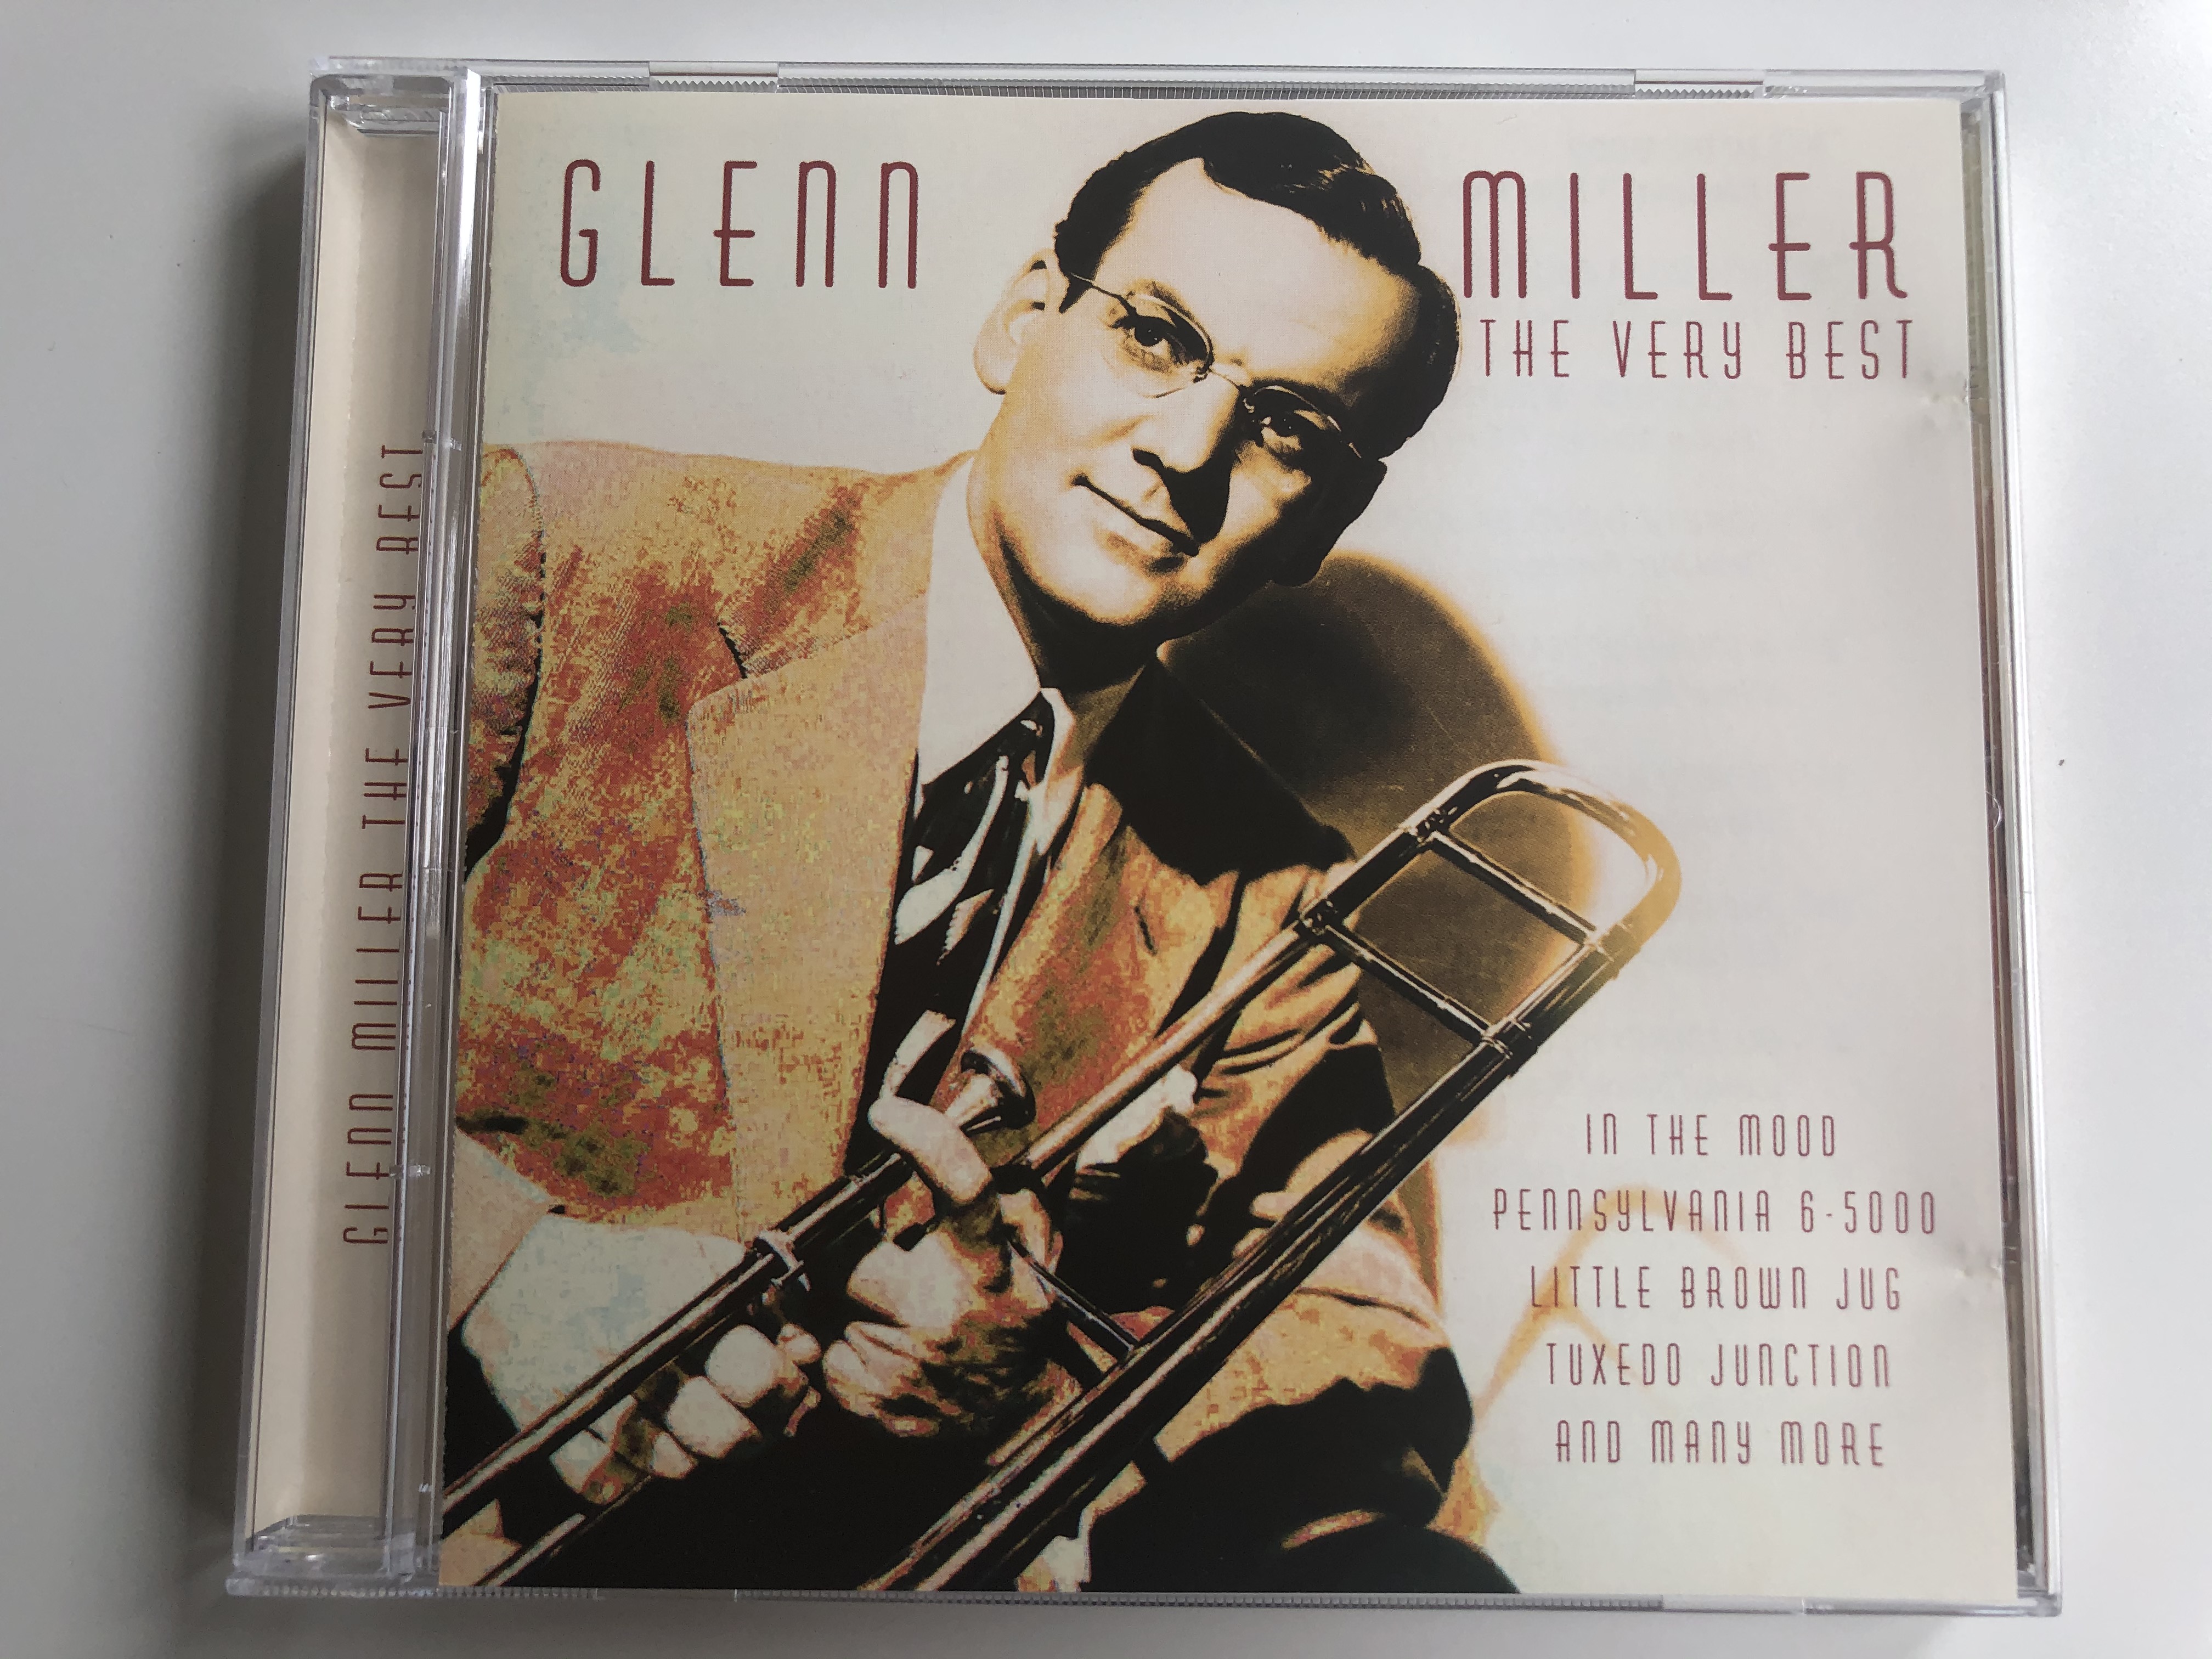 glenn-miller-the-very-best-of-in-the-mood-pennsylvania-6-5000-little-brown-jug-tuxedo-junction-and-many-more-time-is-international-limited-audio-cd-2004-tmi355-1-.jpg